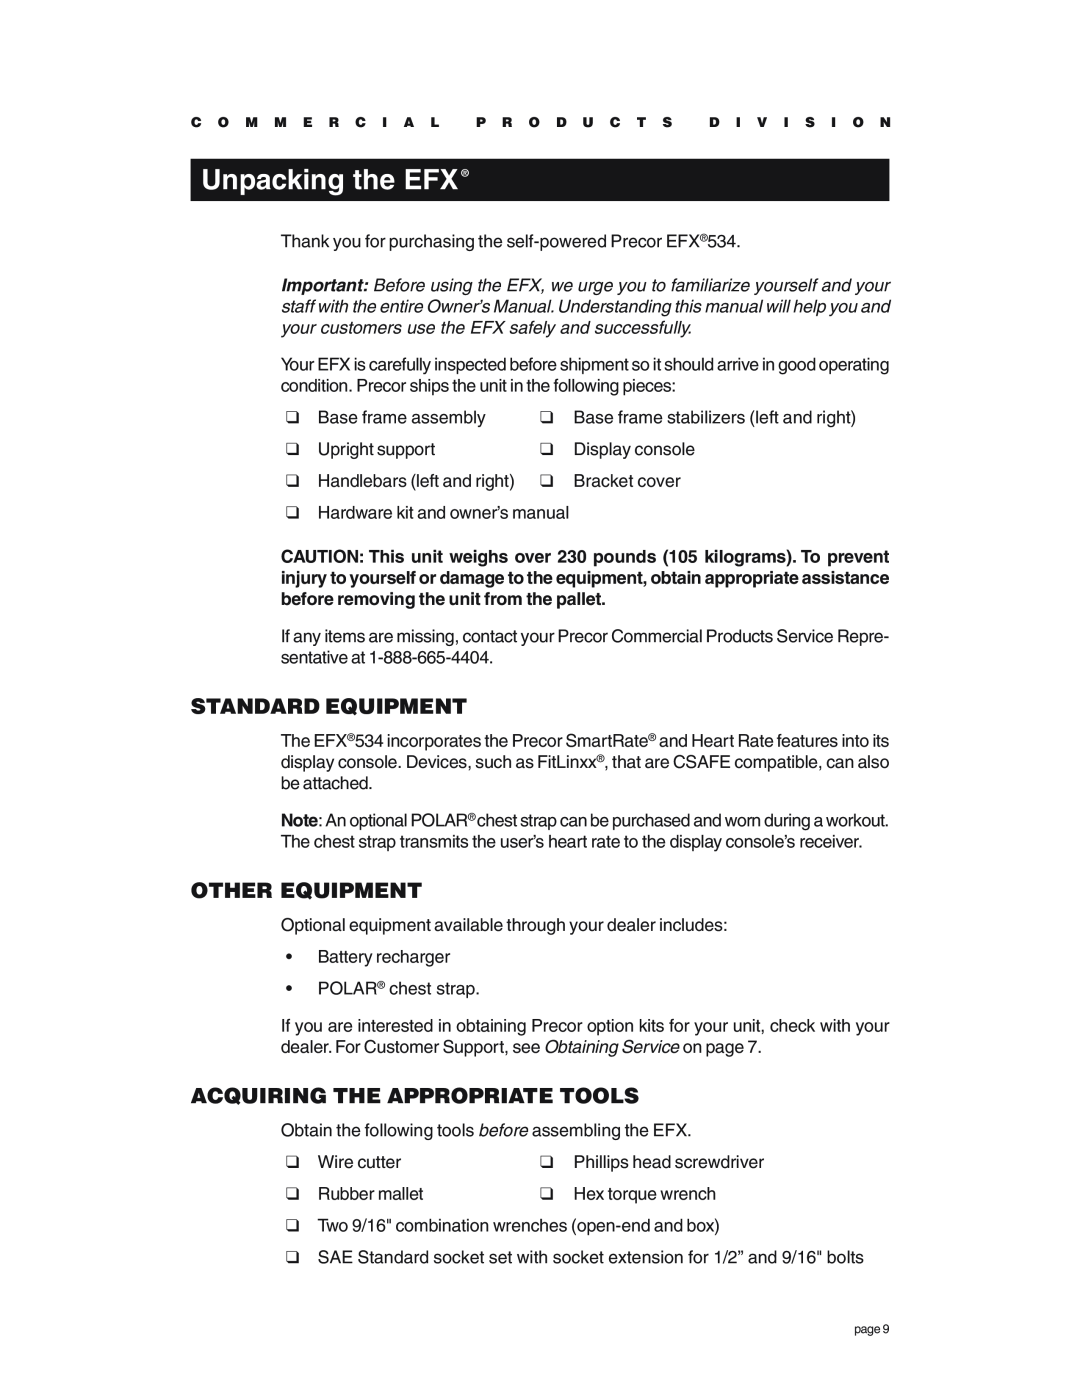 Precor EFX534 owner manual Unpacking the EFX, Standard Equipment, Other Equipment, Acquiring The Appropriate Tools 